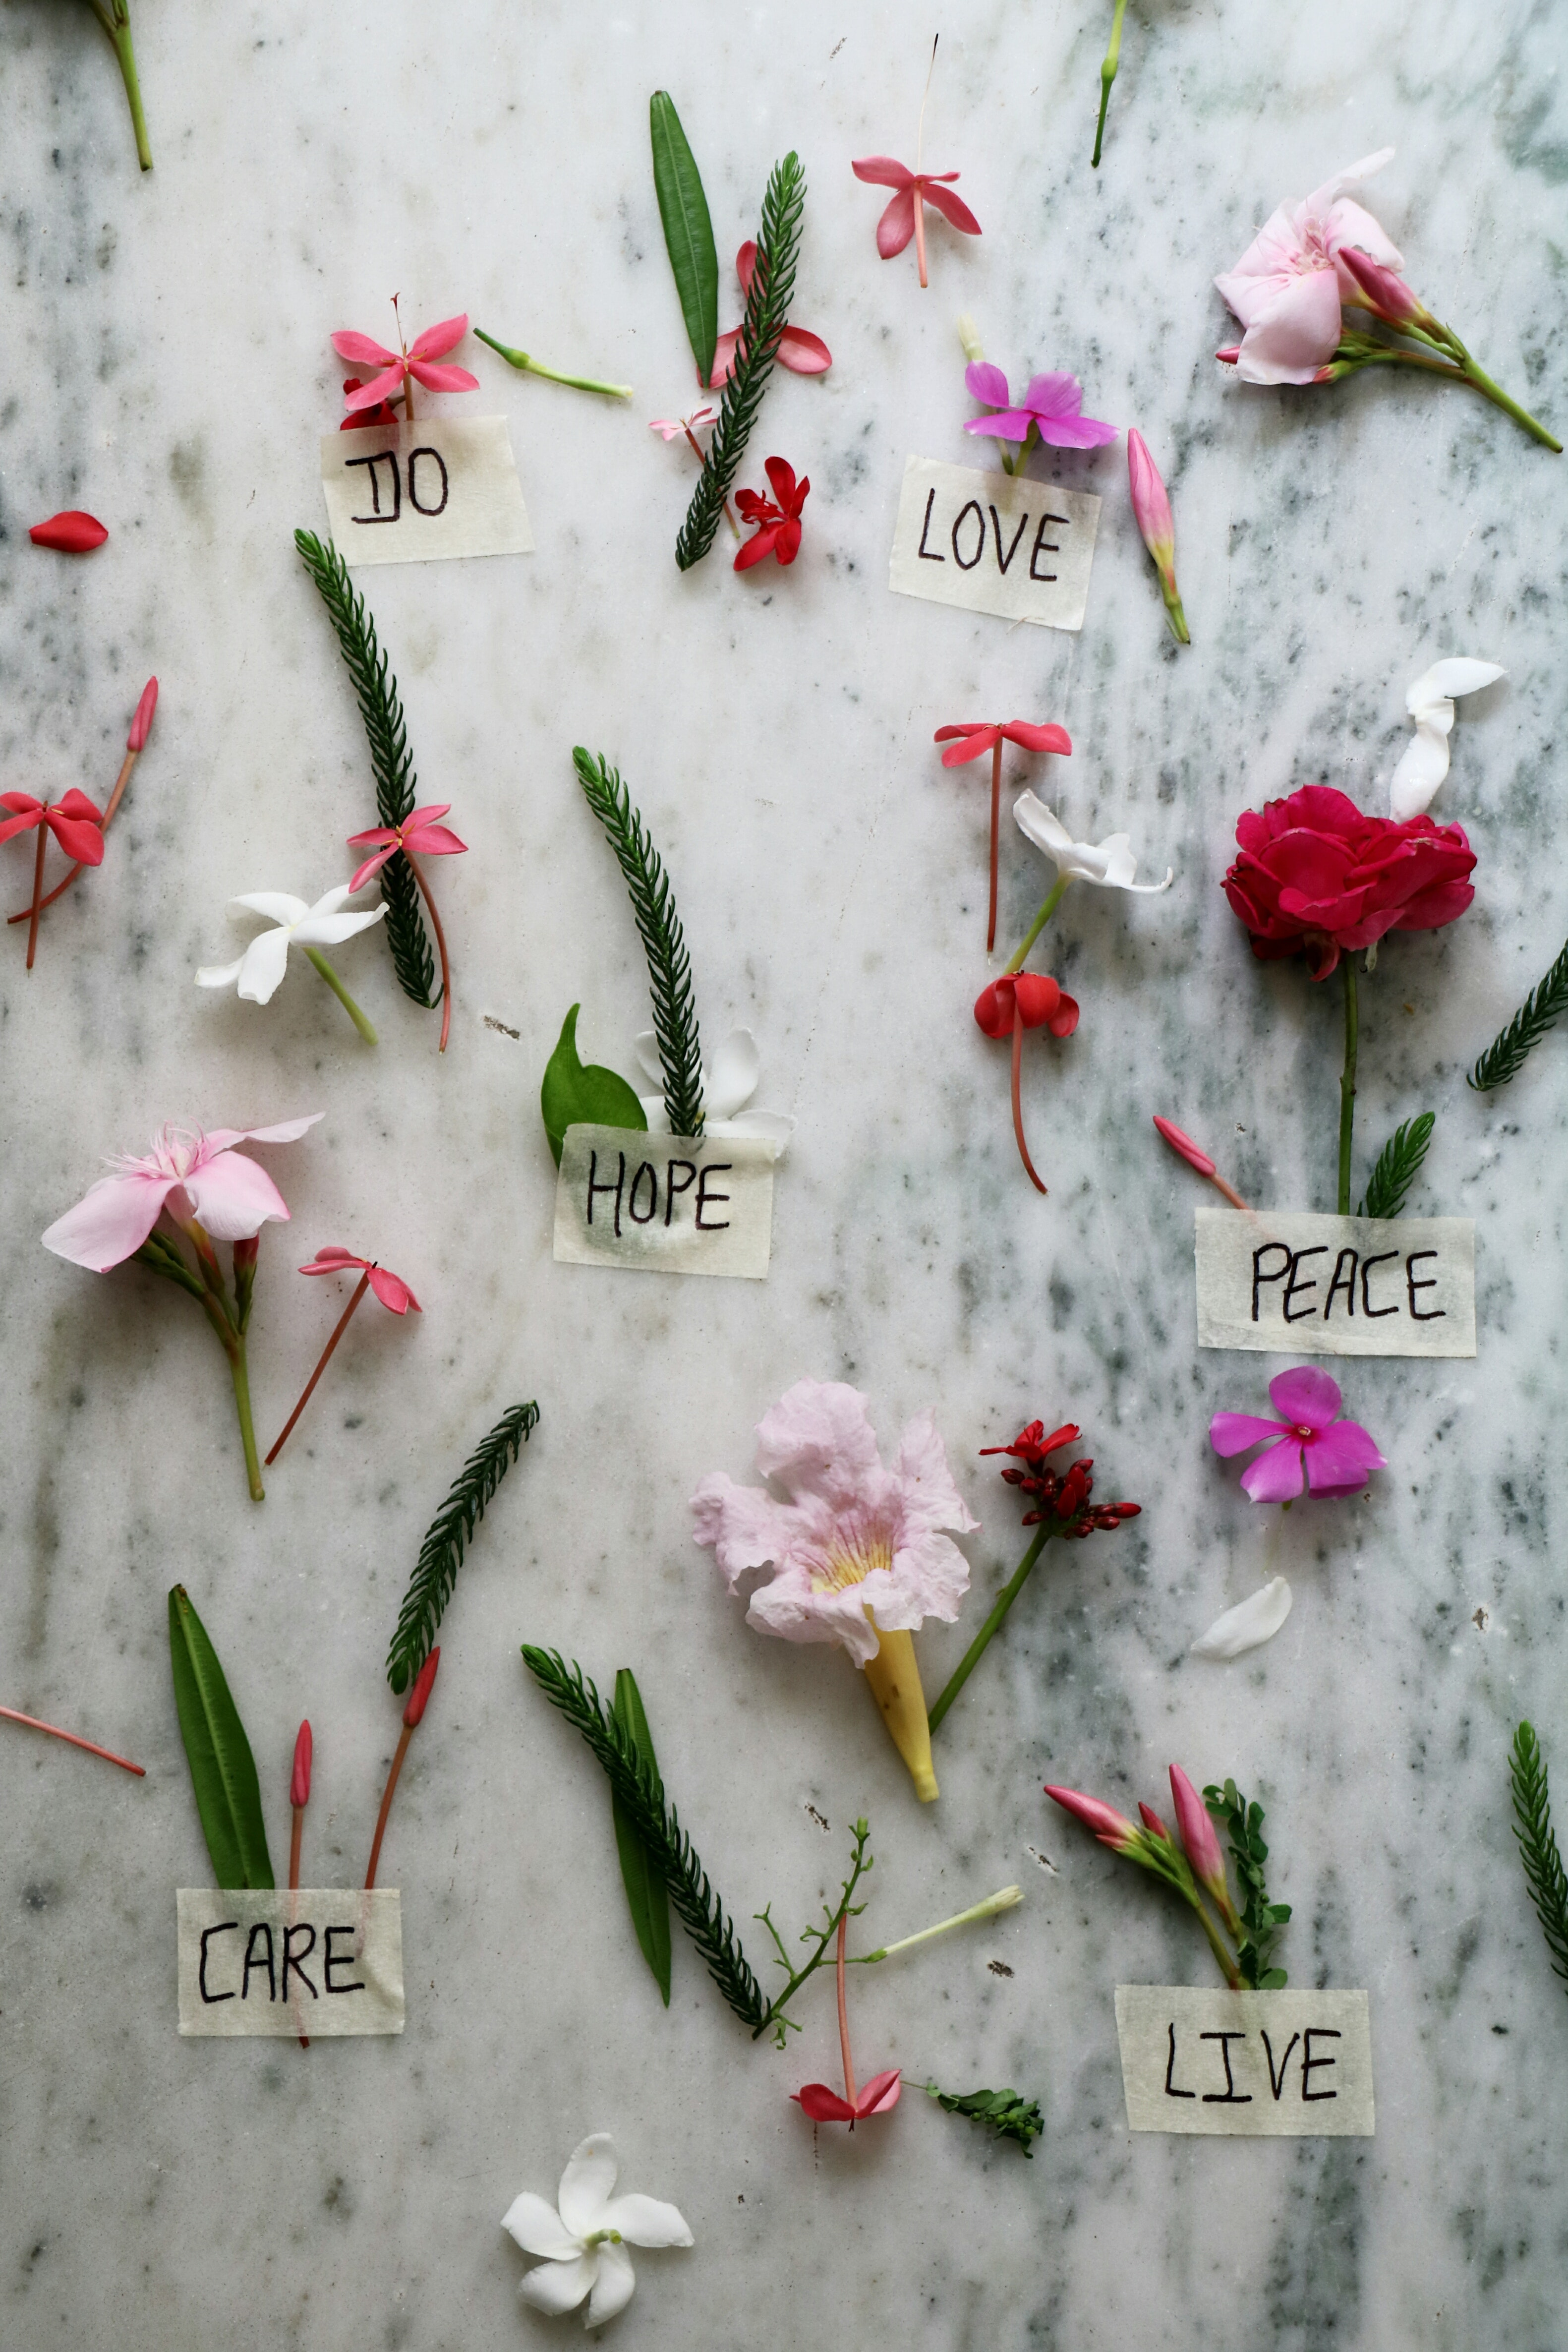 Flowers with words taped to them. | Source: Pexels